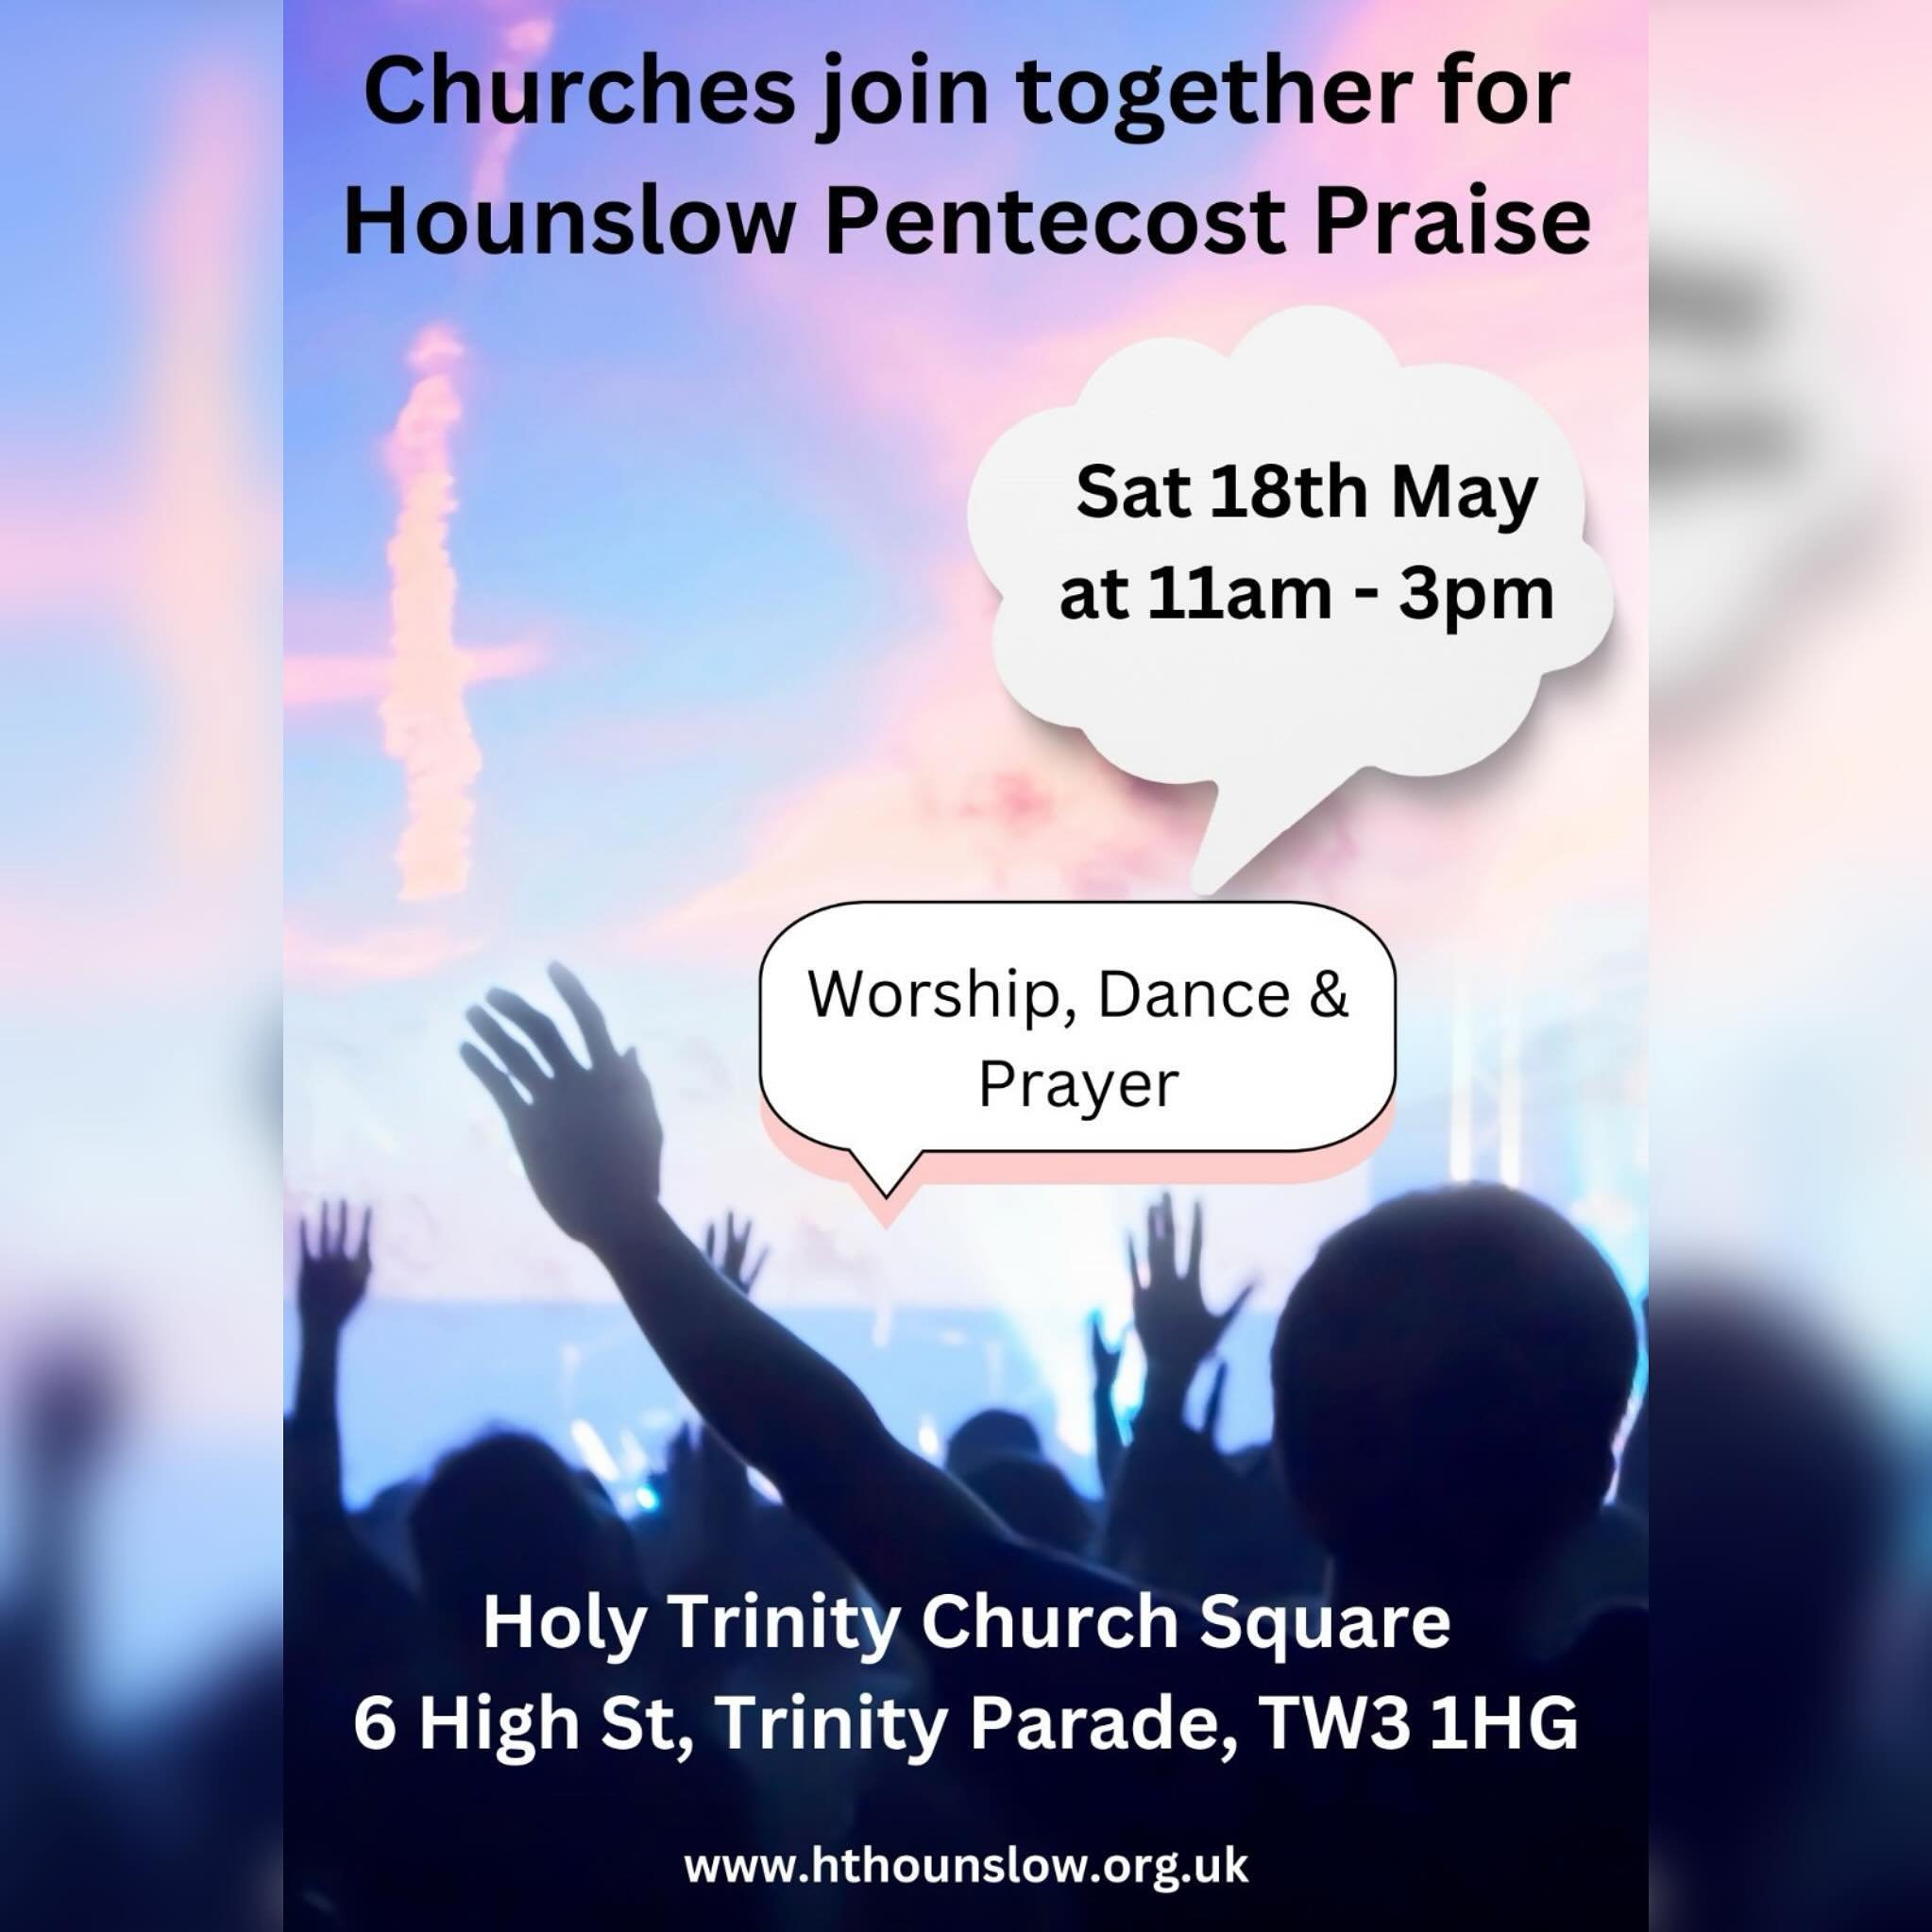 Come and join us for our Annual Hounslow Pentecost praise where we join together with local churches across the Hounslow borough for Worship, Dance and Prayer. Sign up on our website to let us know you are coming